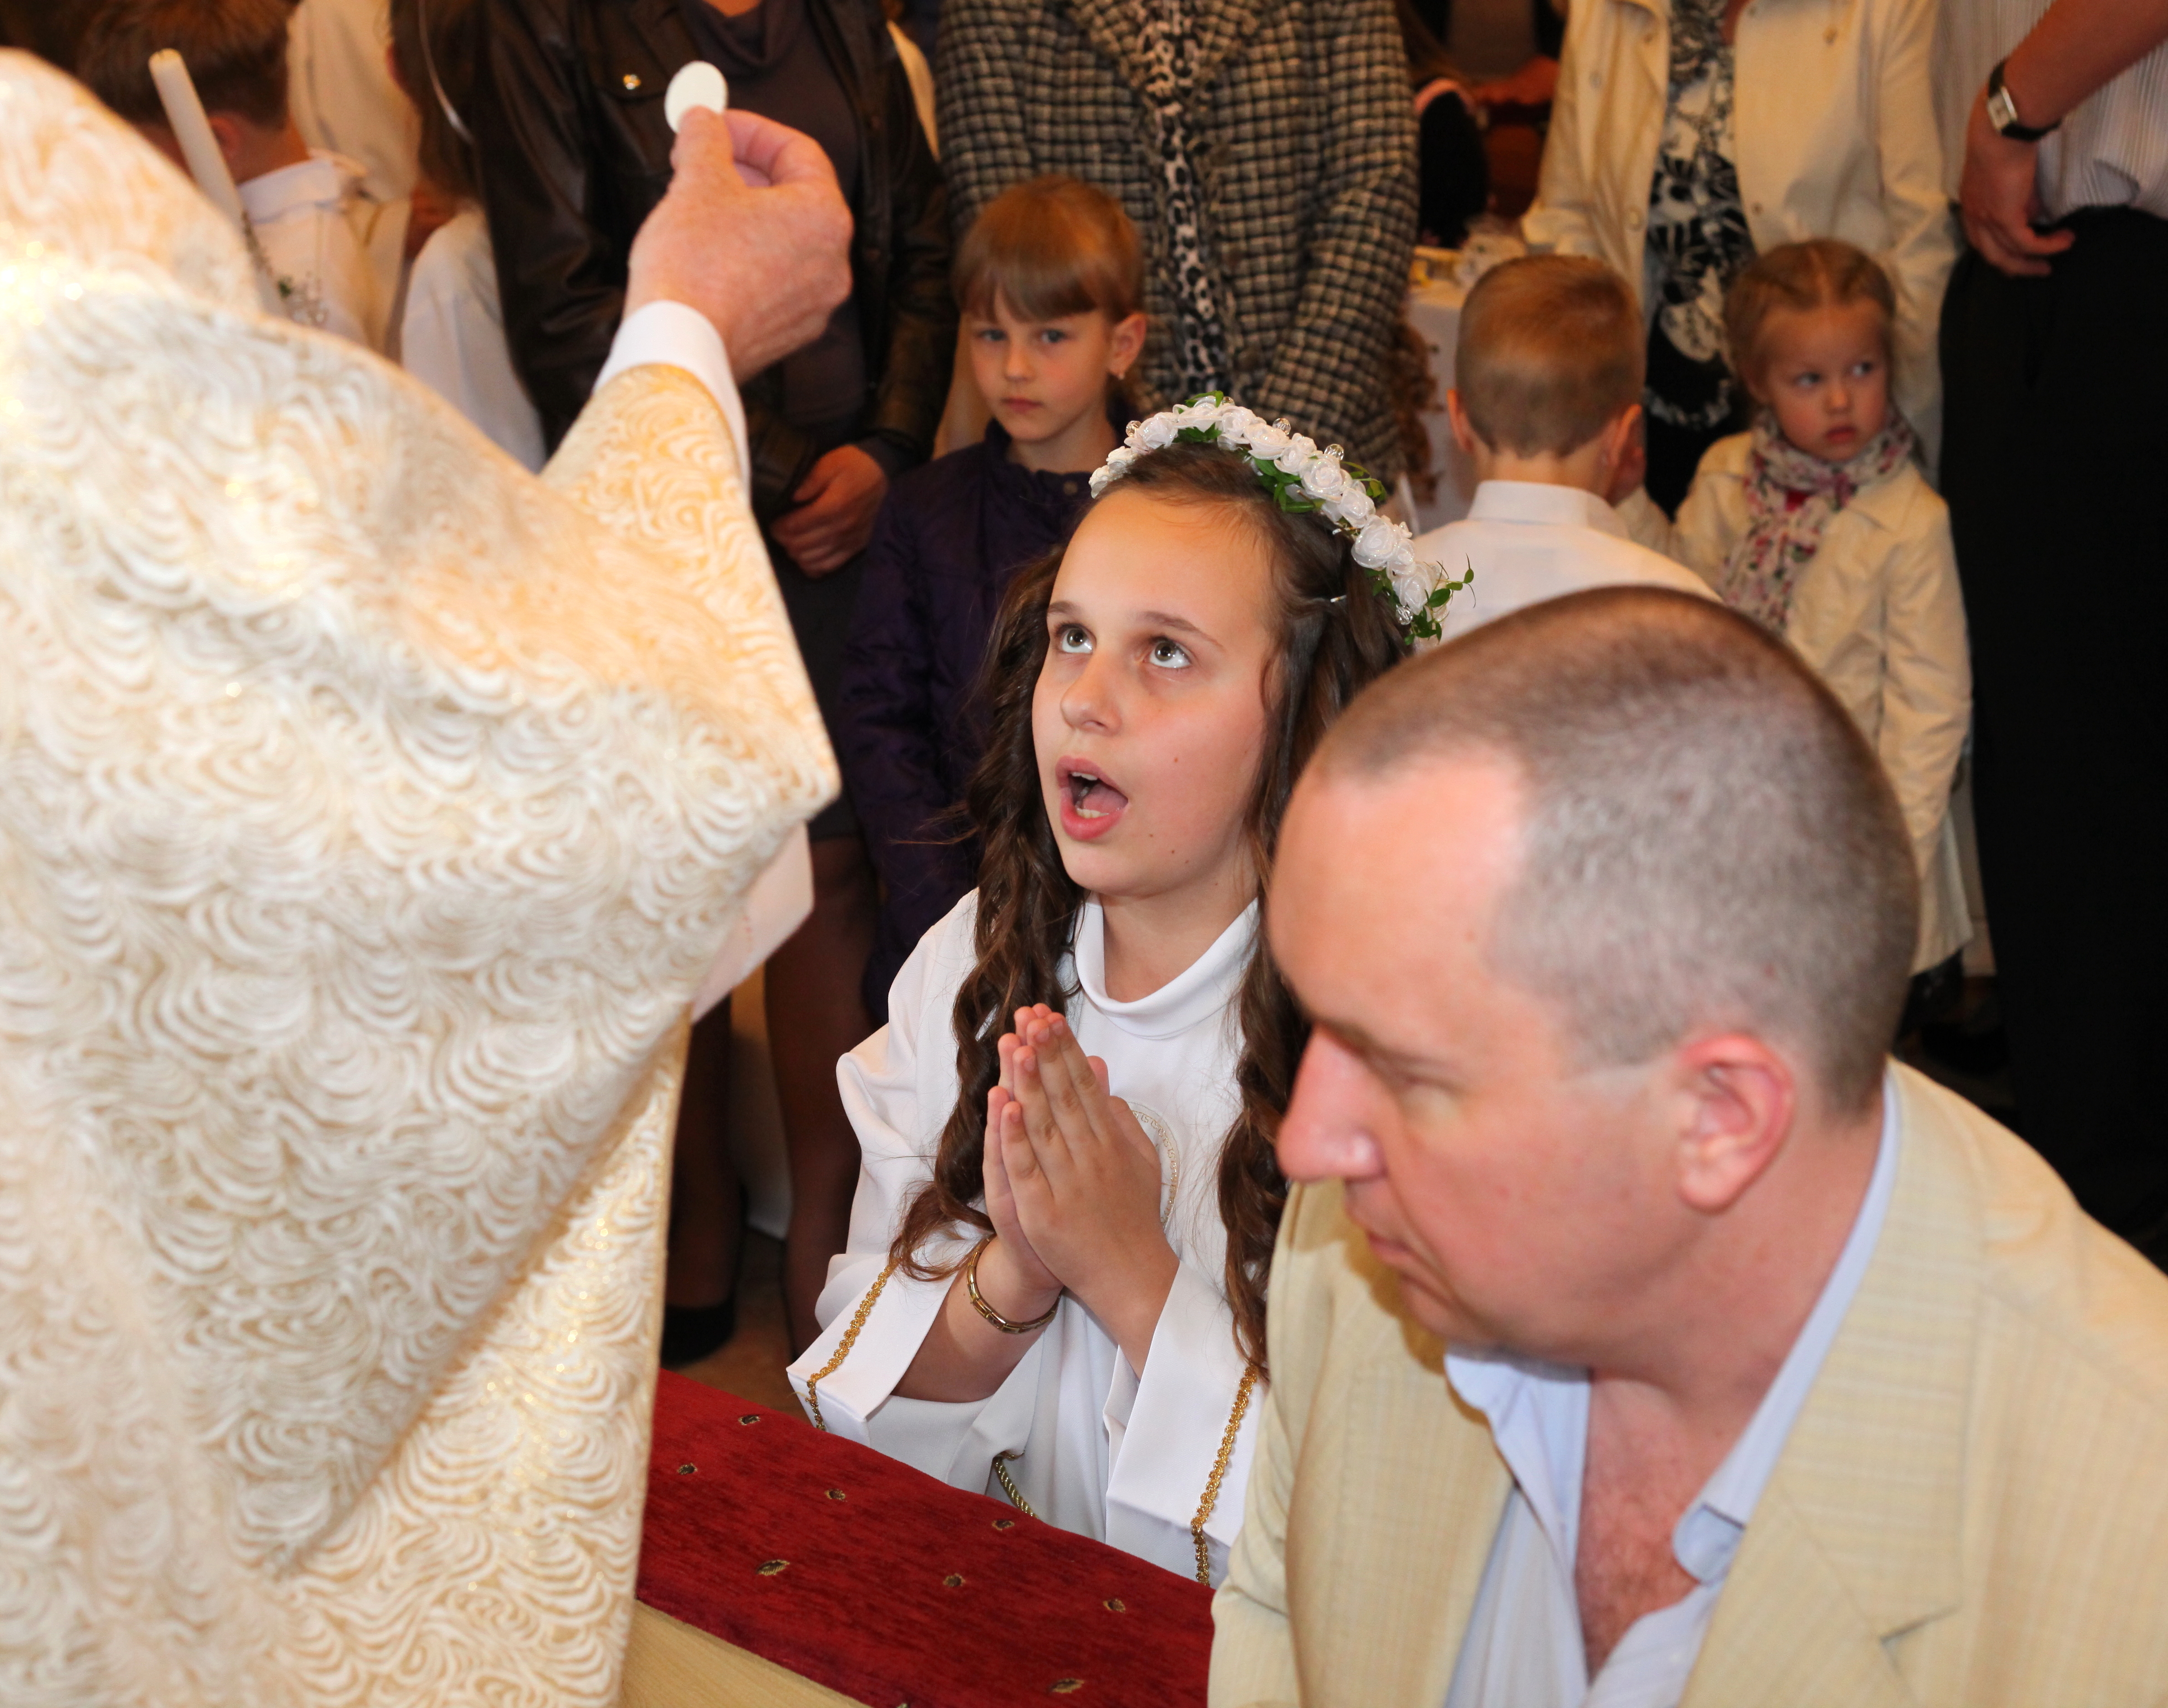 the first Holy Communion for children in May 2013, picture 3 out of 5